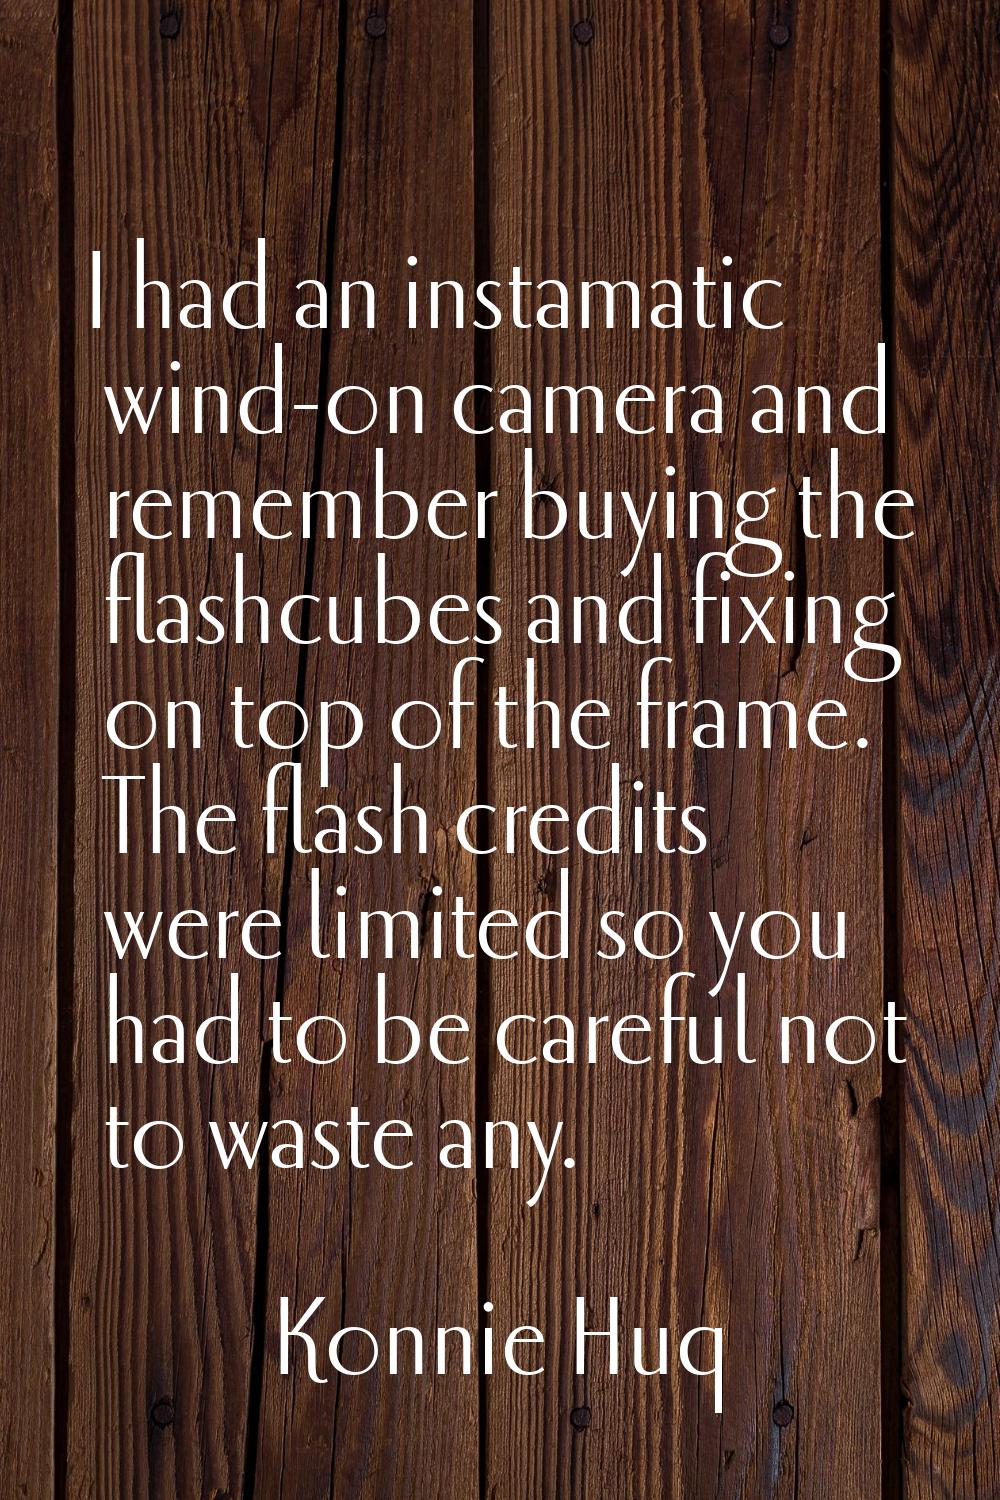 I had an instamatic wind-on camera and remember buying the flashcubes and fixing on top of the fram